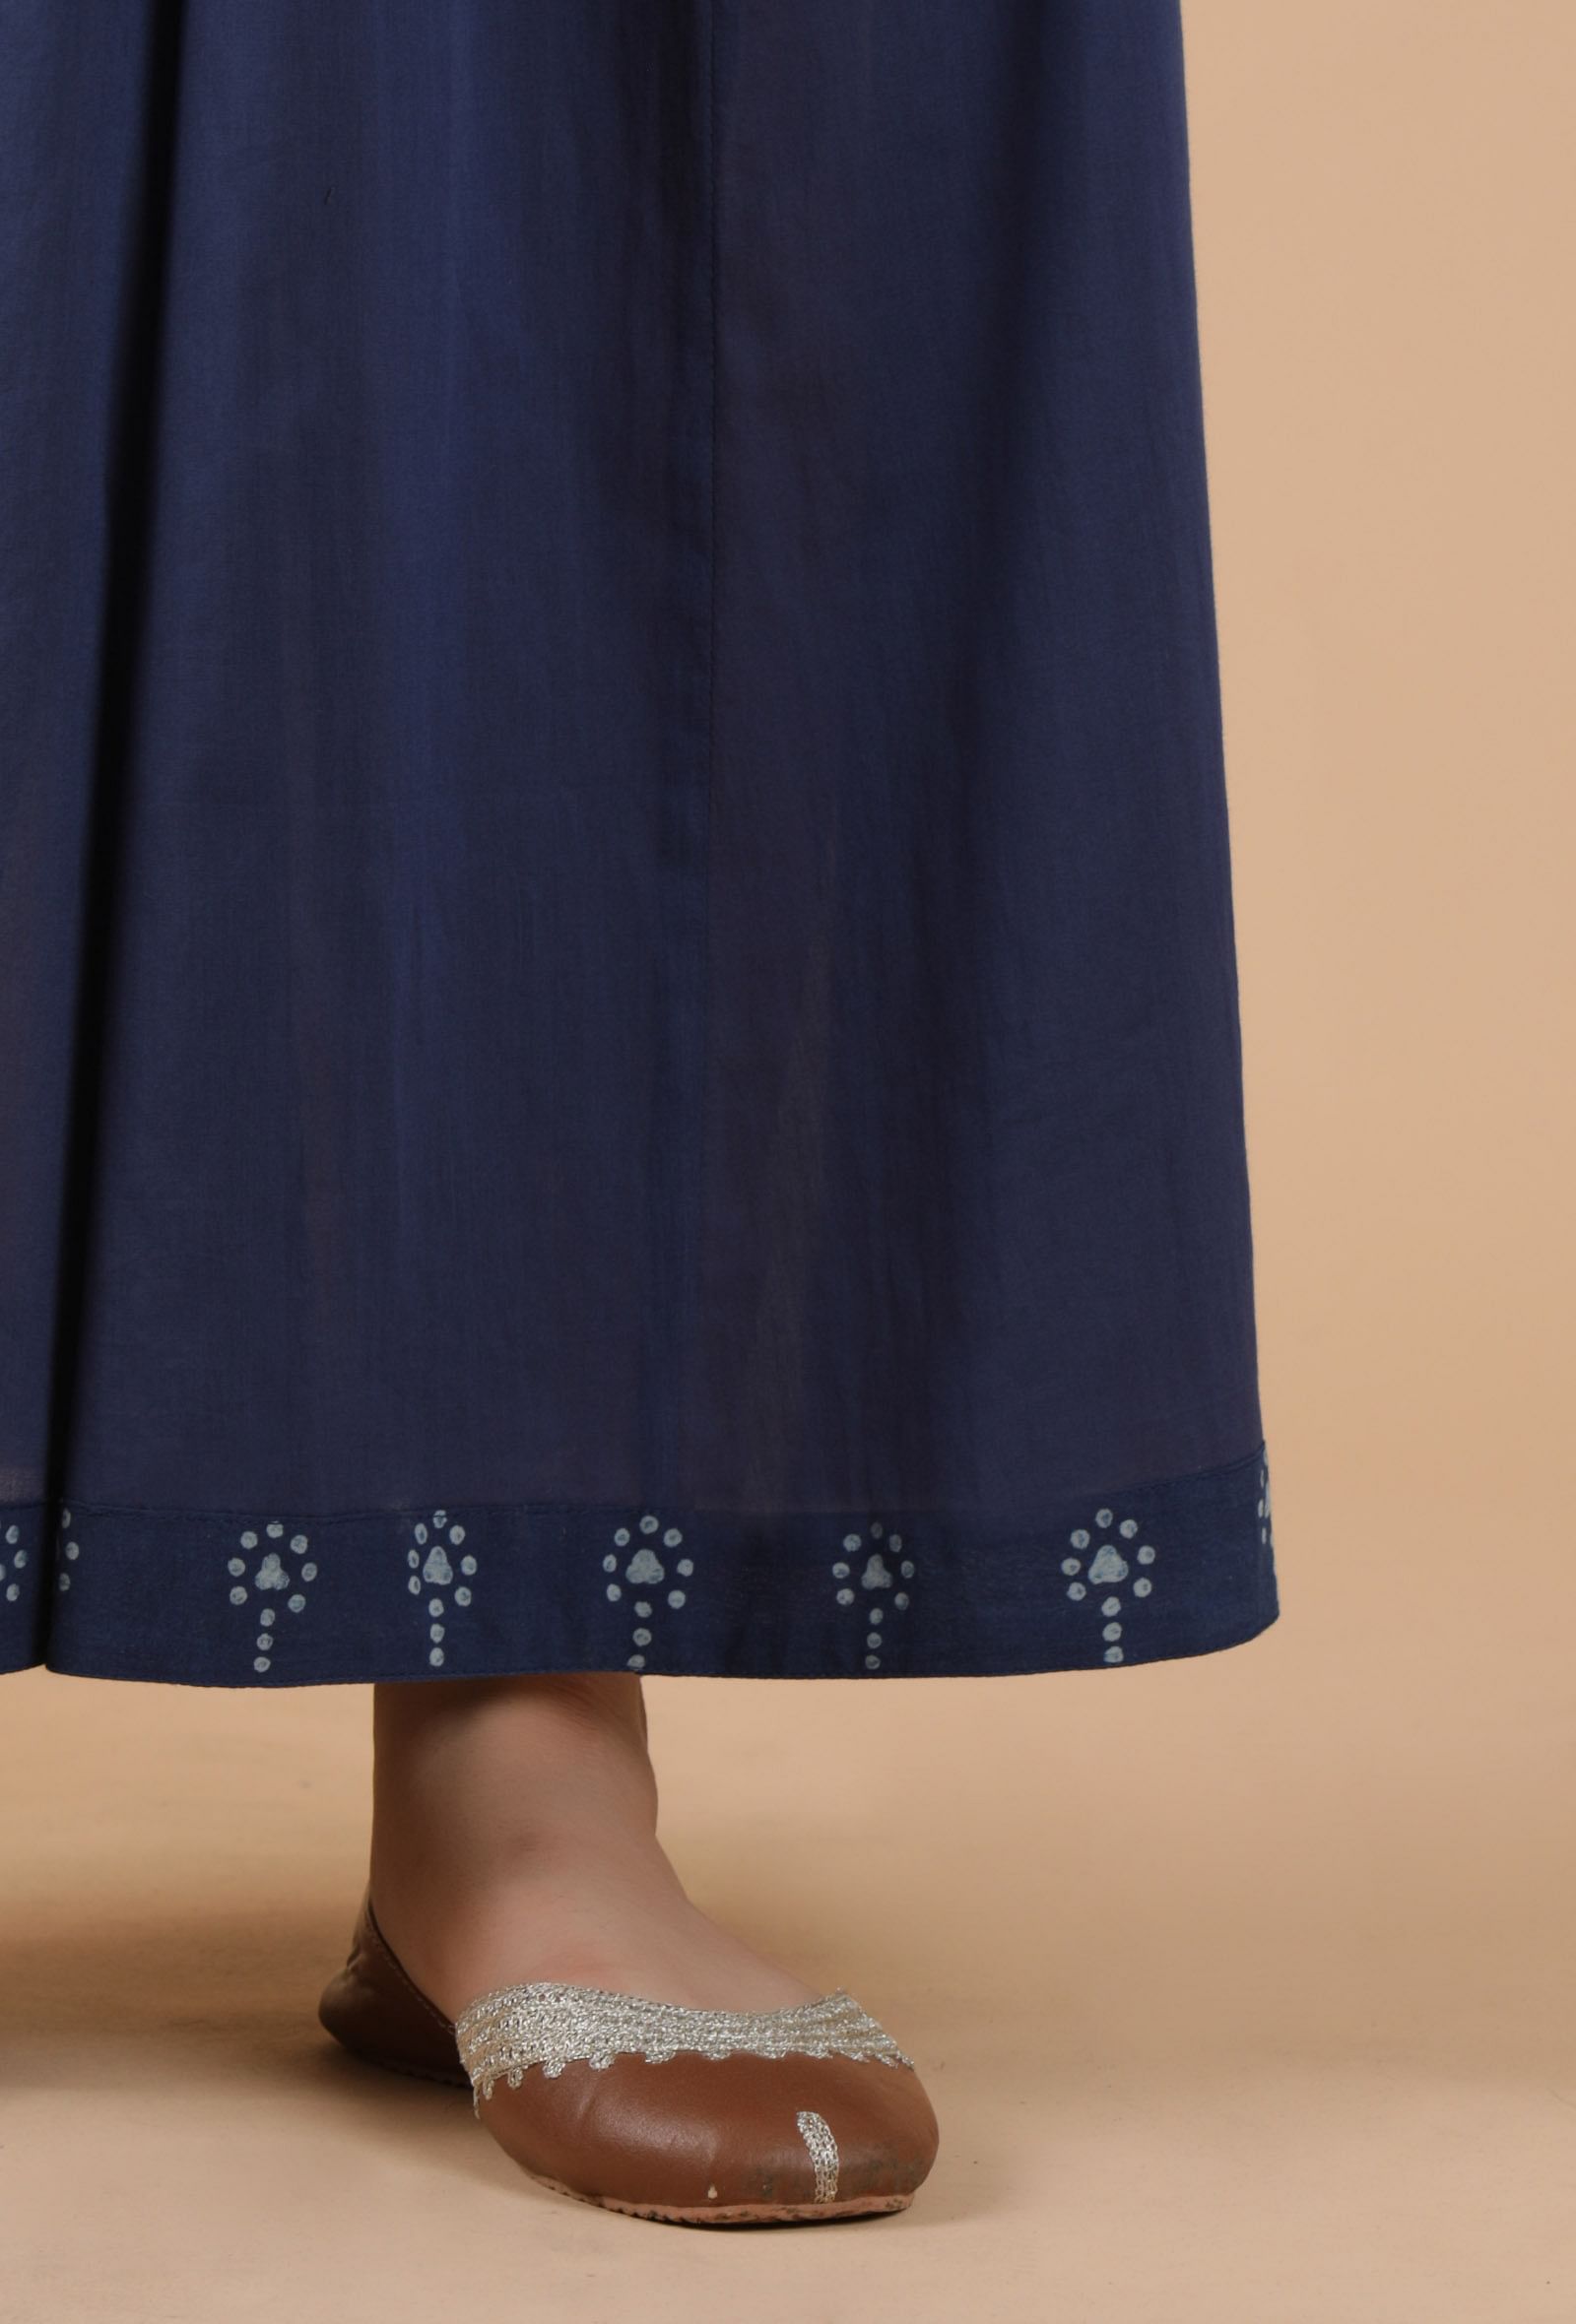 6 Flawless Palazzo Pants for Your Body Type That Every Woman Should Know